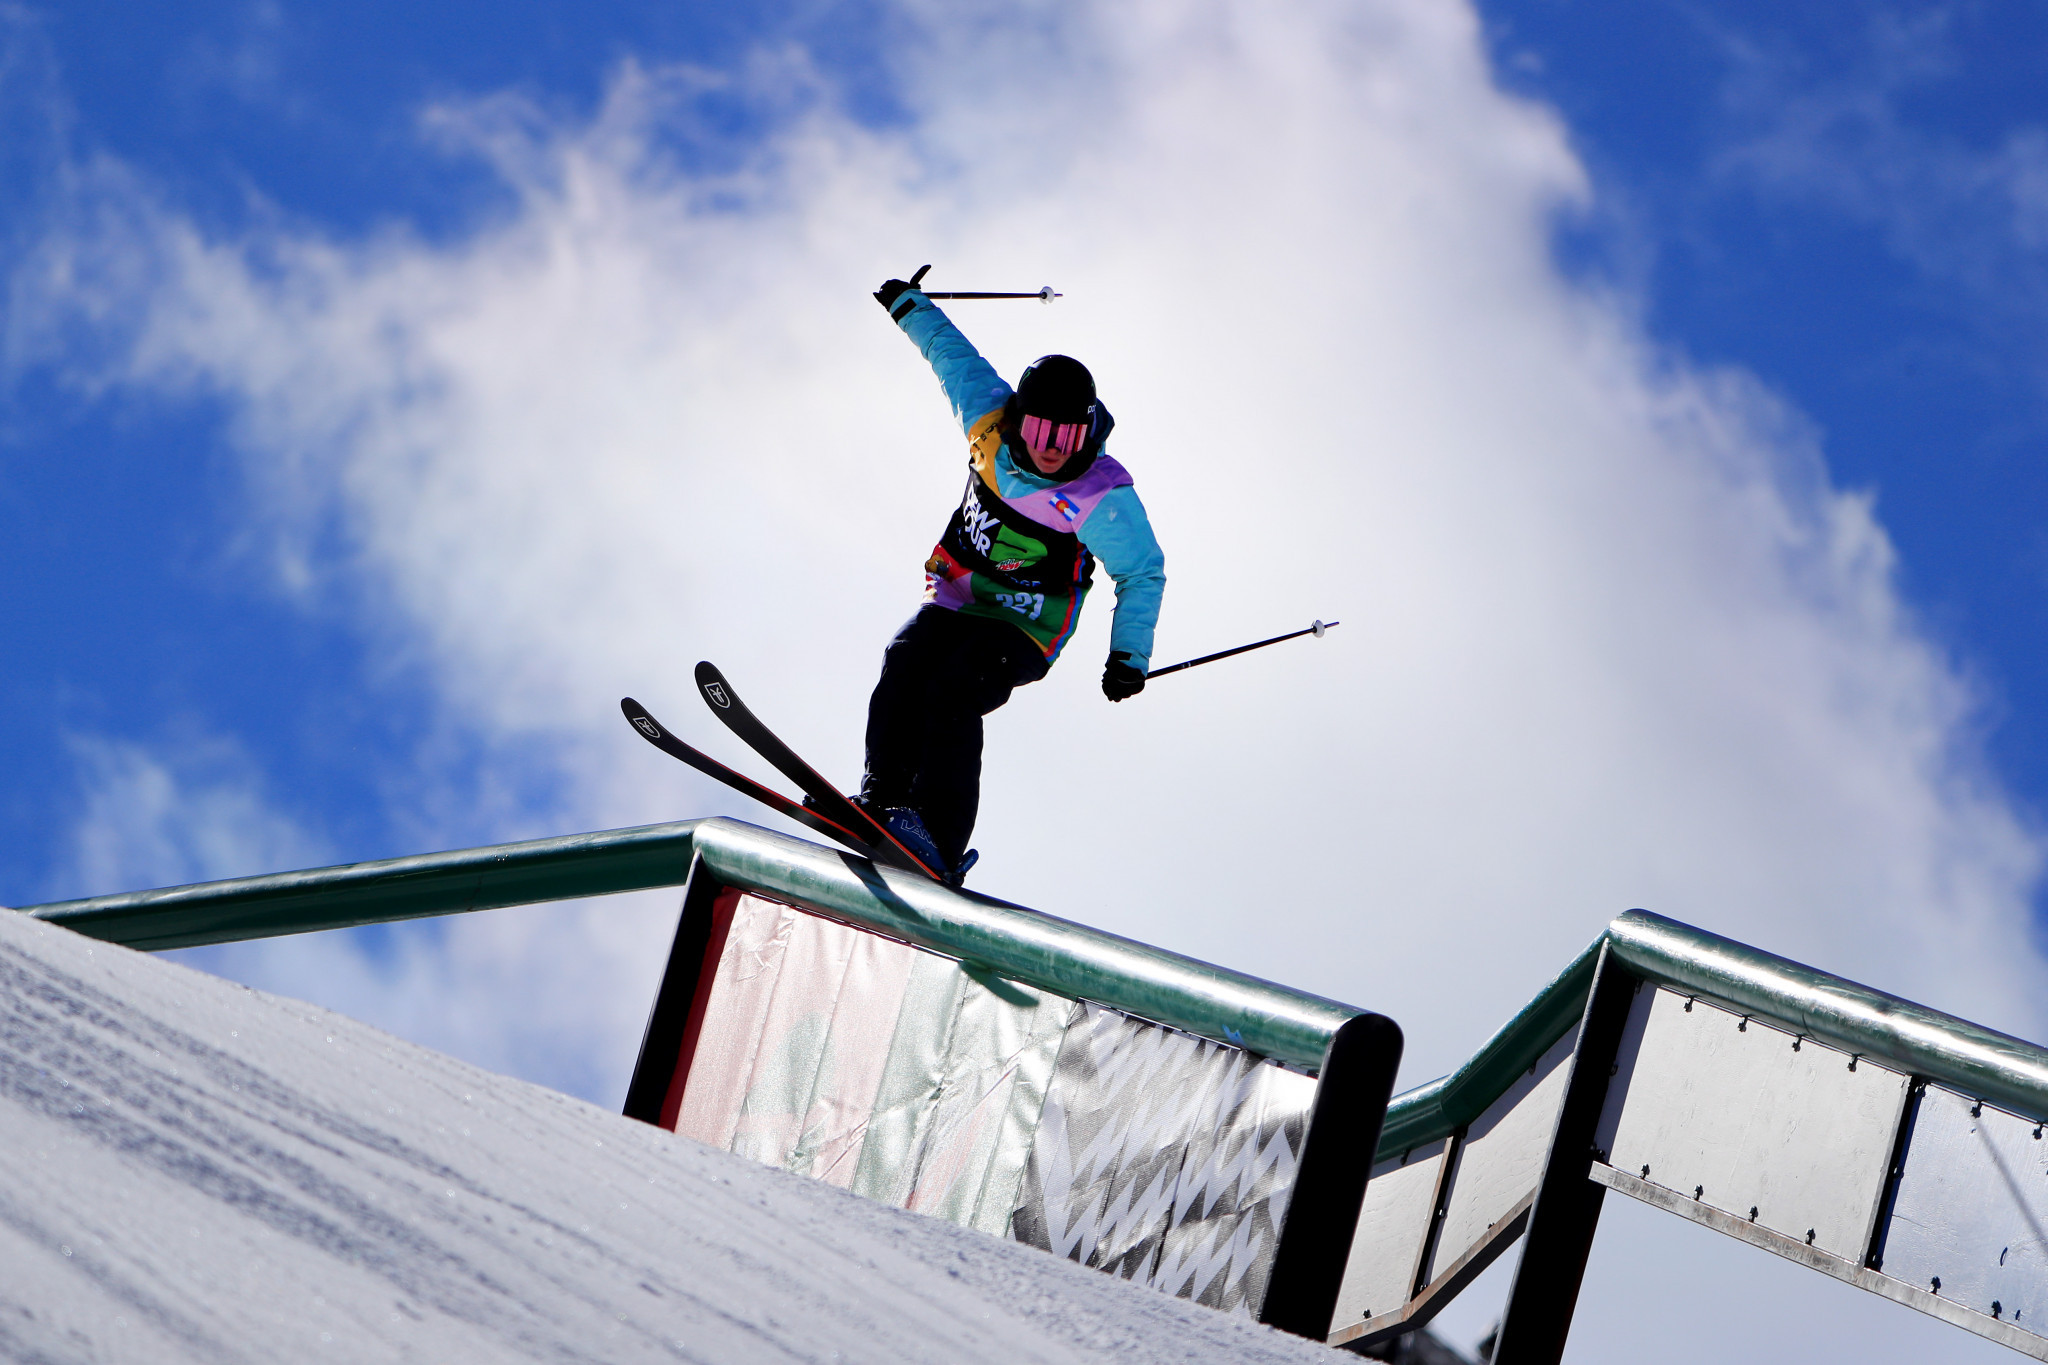 Olympic champion Hoefflin tops qualifying at last FIS Slopestyle World Cup of season